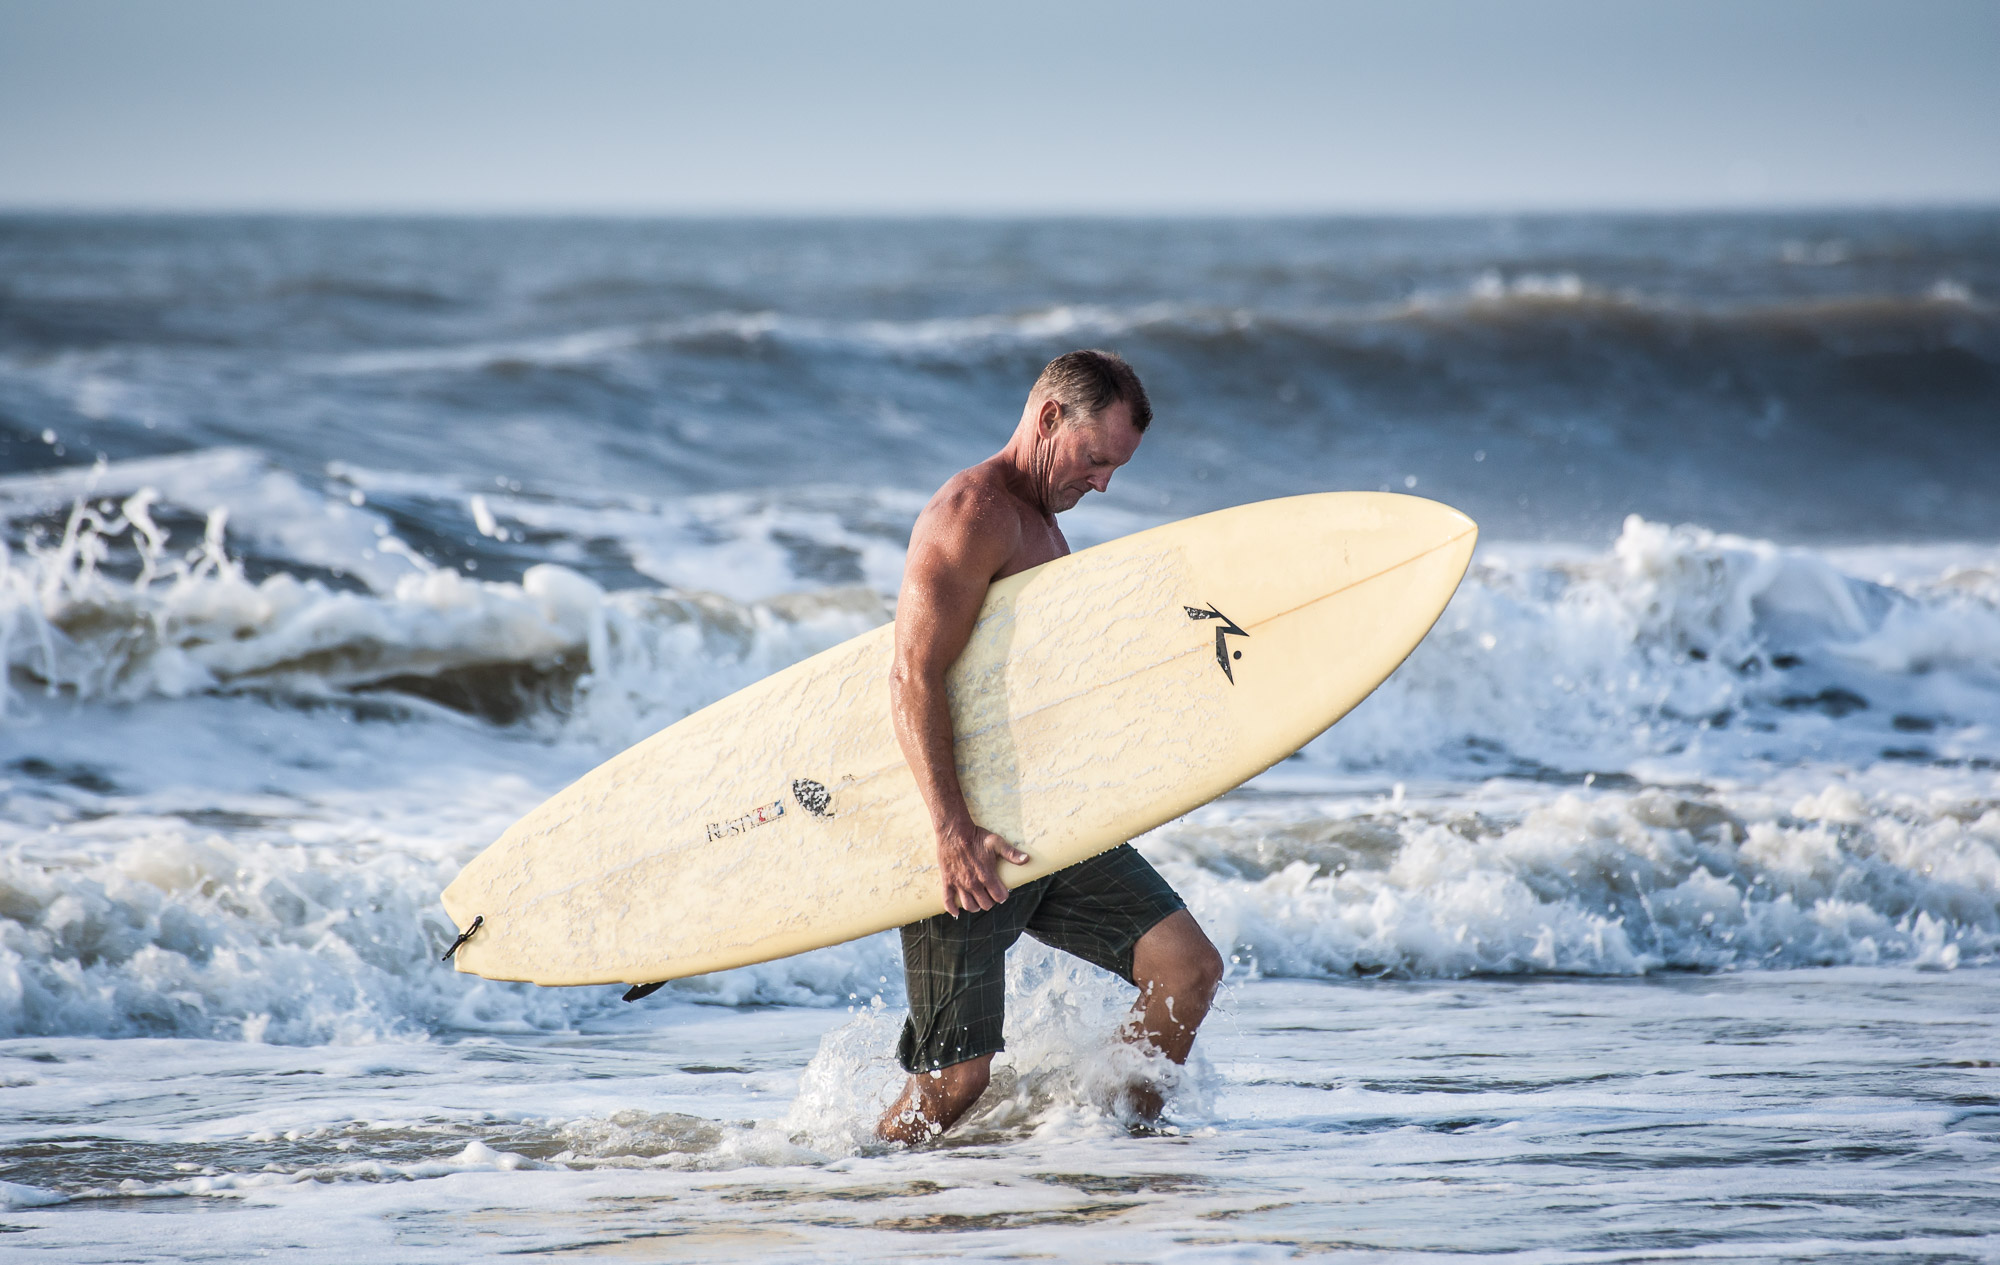 active senior citizen staying healthy by surfing